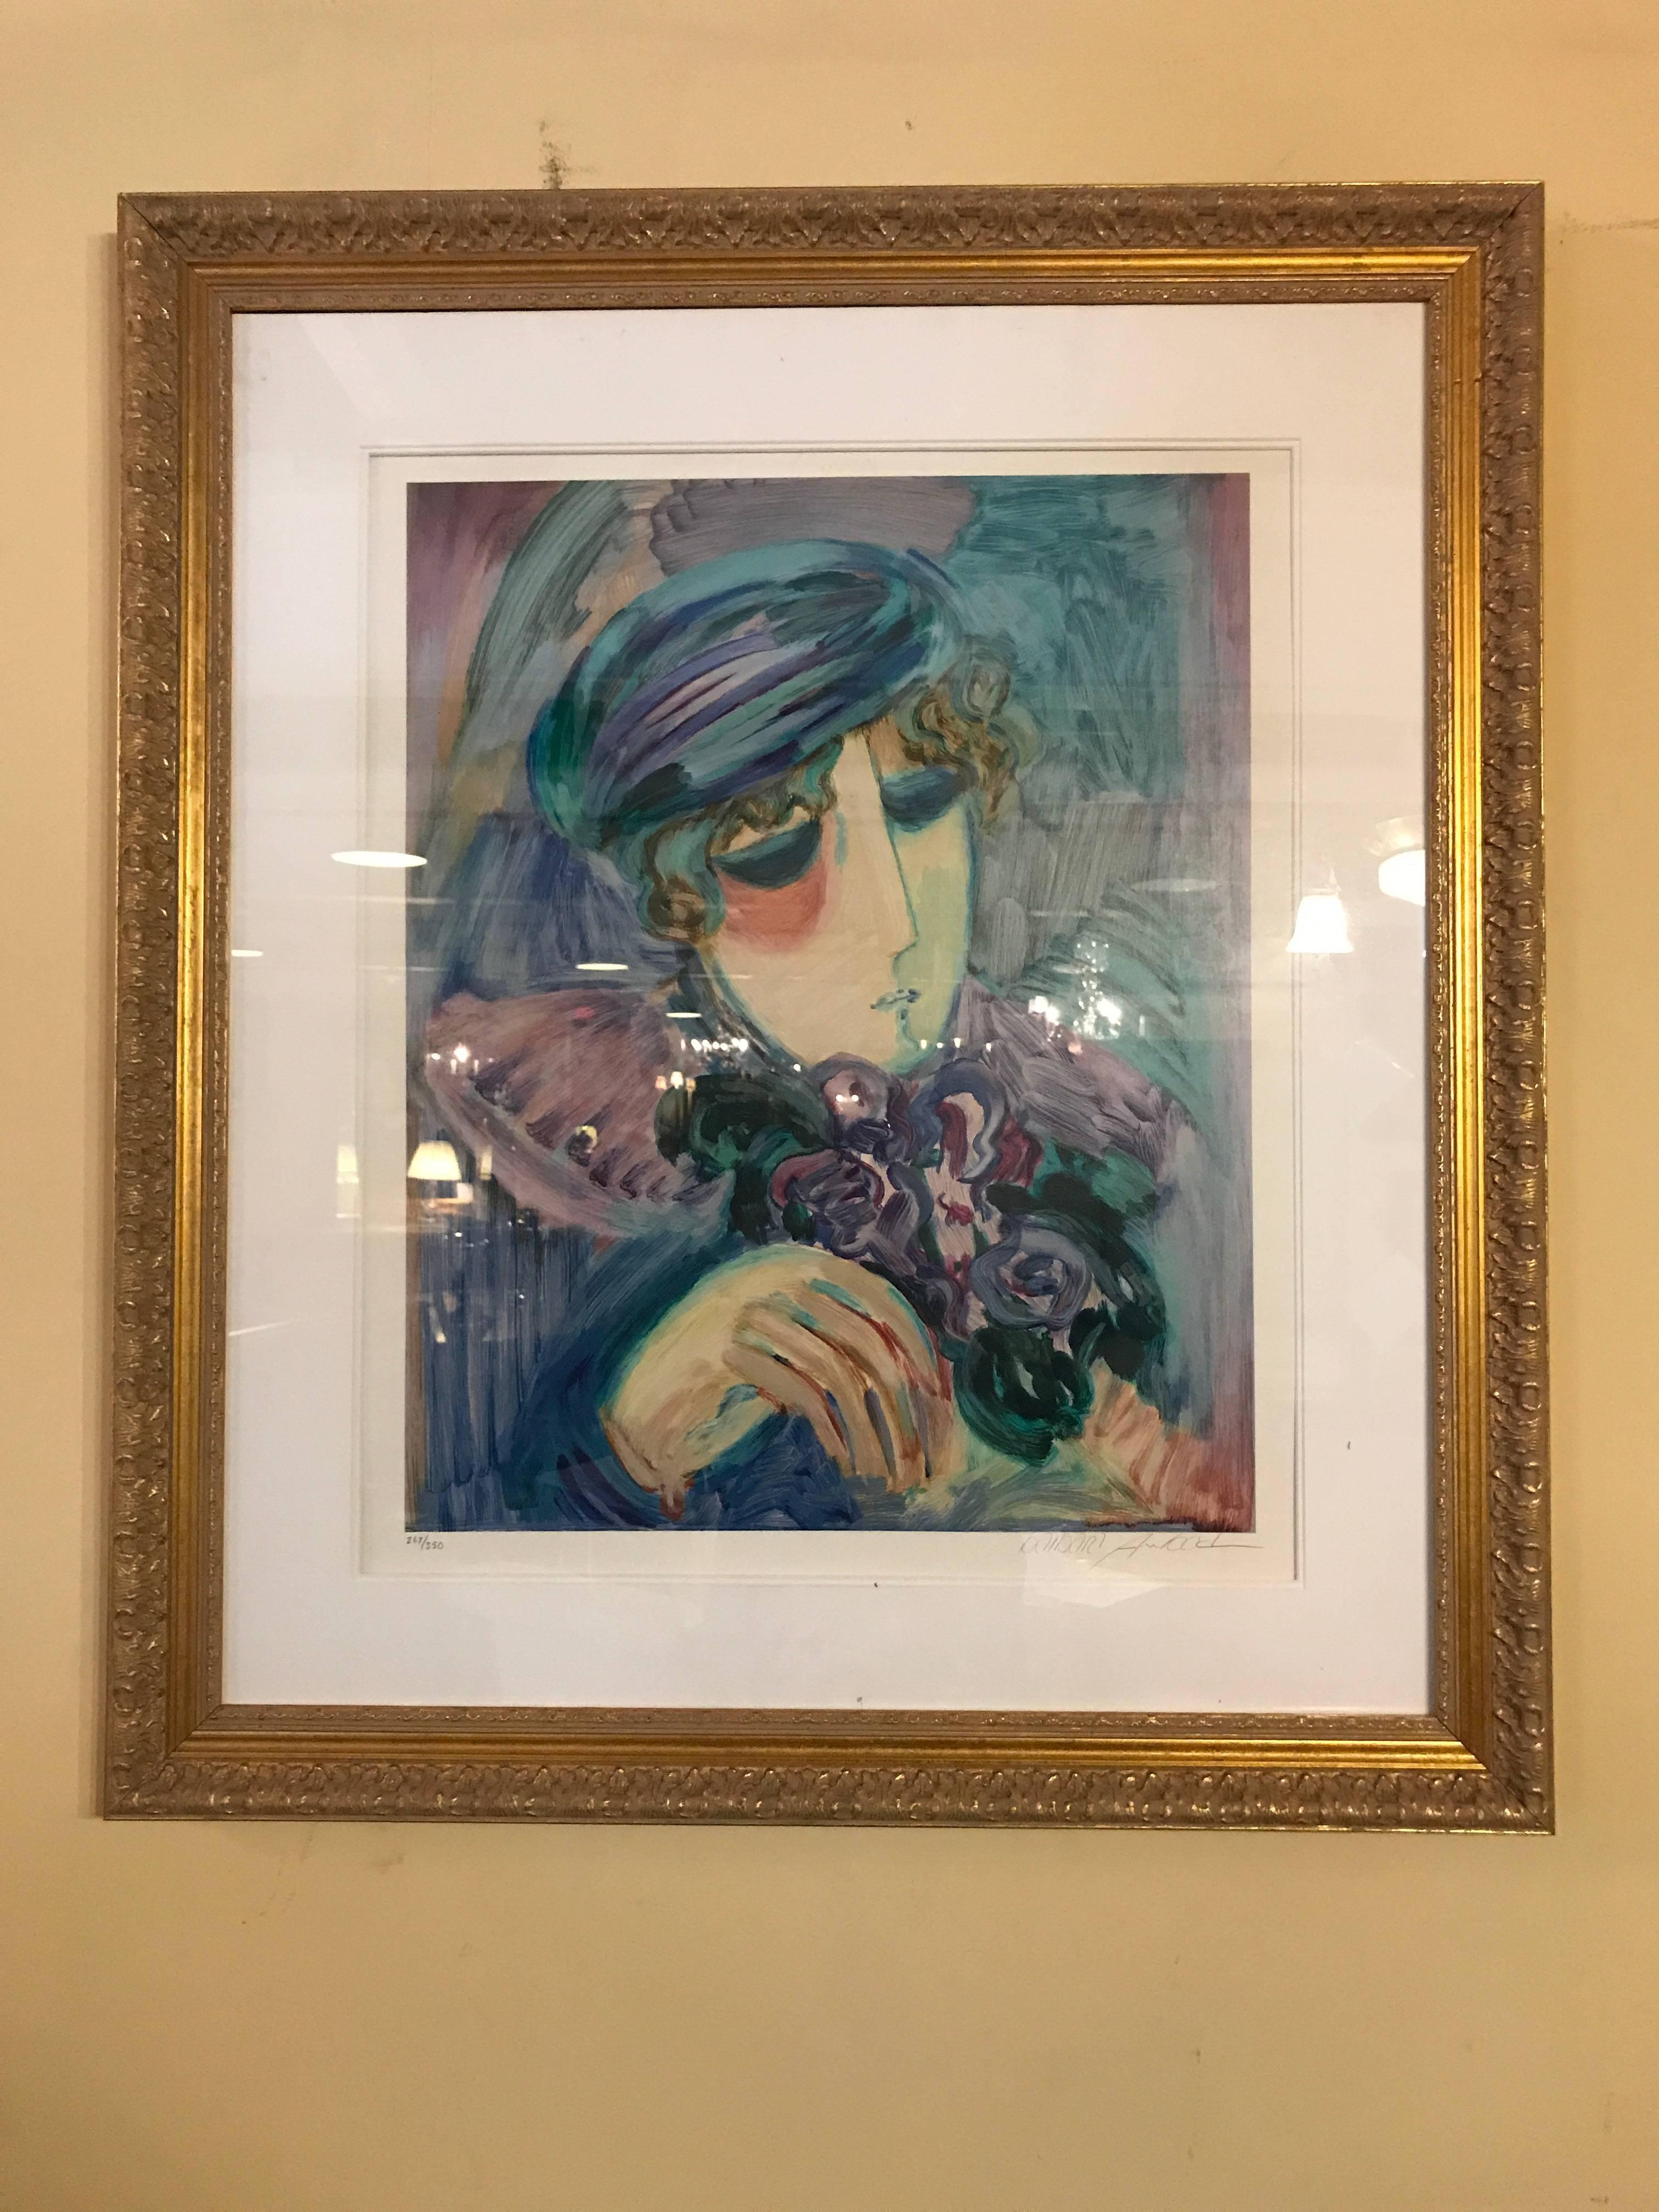 A finely framed and matted lithograph by Barbara A. Wood woman with hat flowers.
From Columbus, Ohio, Barbara Wood is a painter of modernist figures, especially females, and genre scenes, and for much of her subject matters, draws on her own life